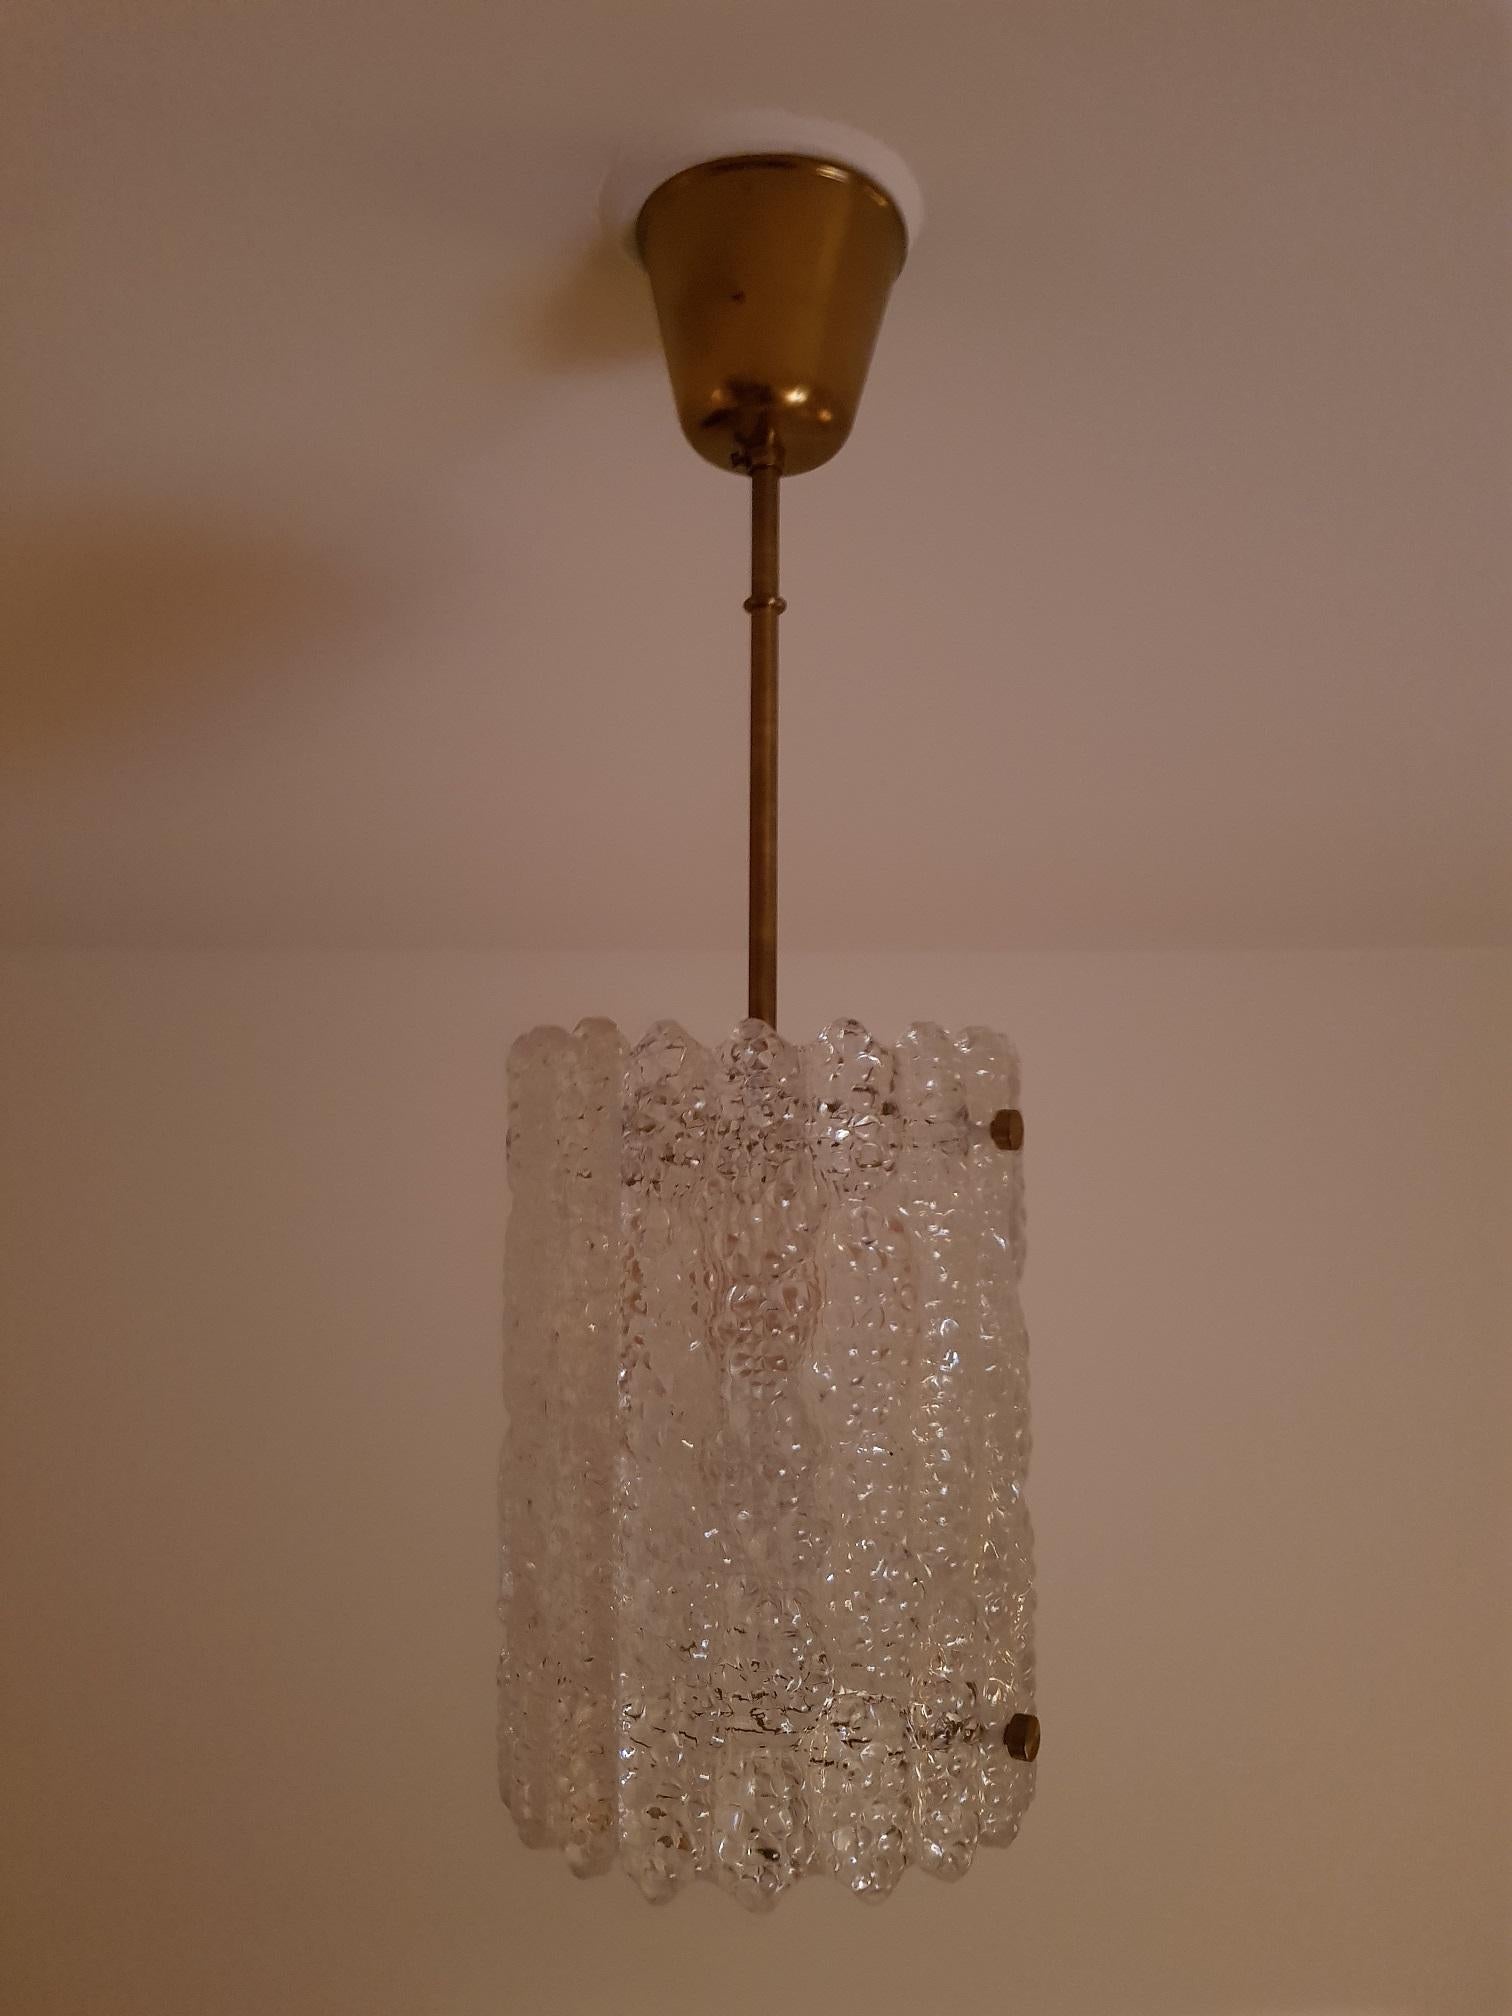 Carl Fagerlund 2 Pendant Lights Brass and Glass 1960s, Orrefors Sweden In Good Condition For Sale In Limhamn, SE